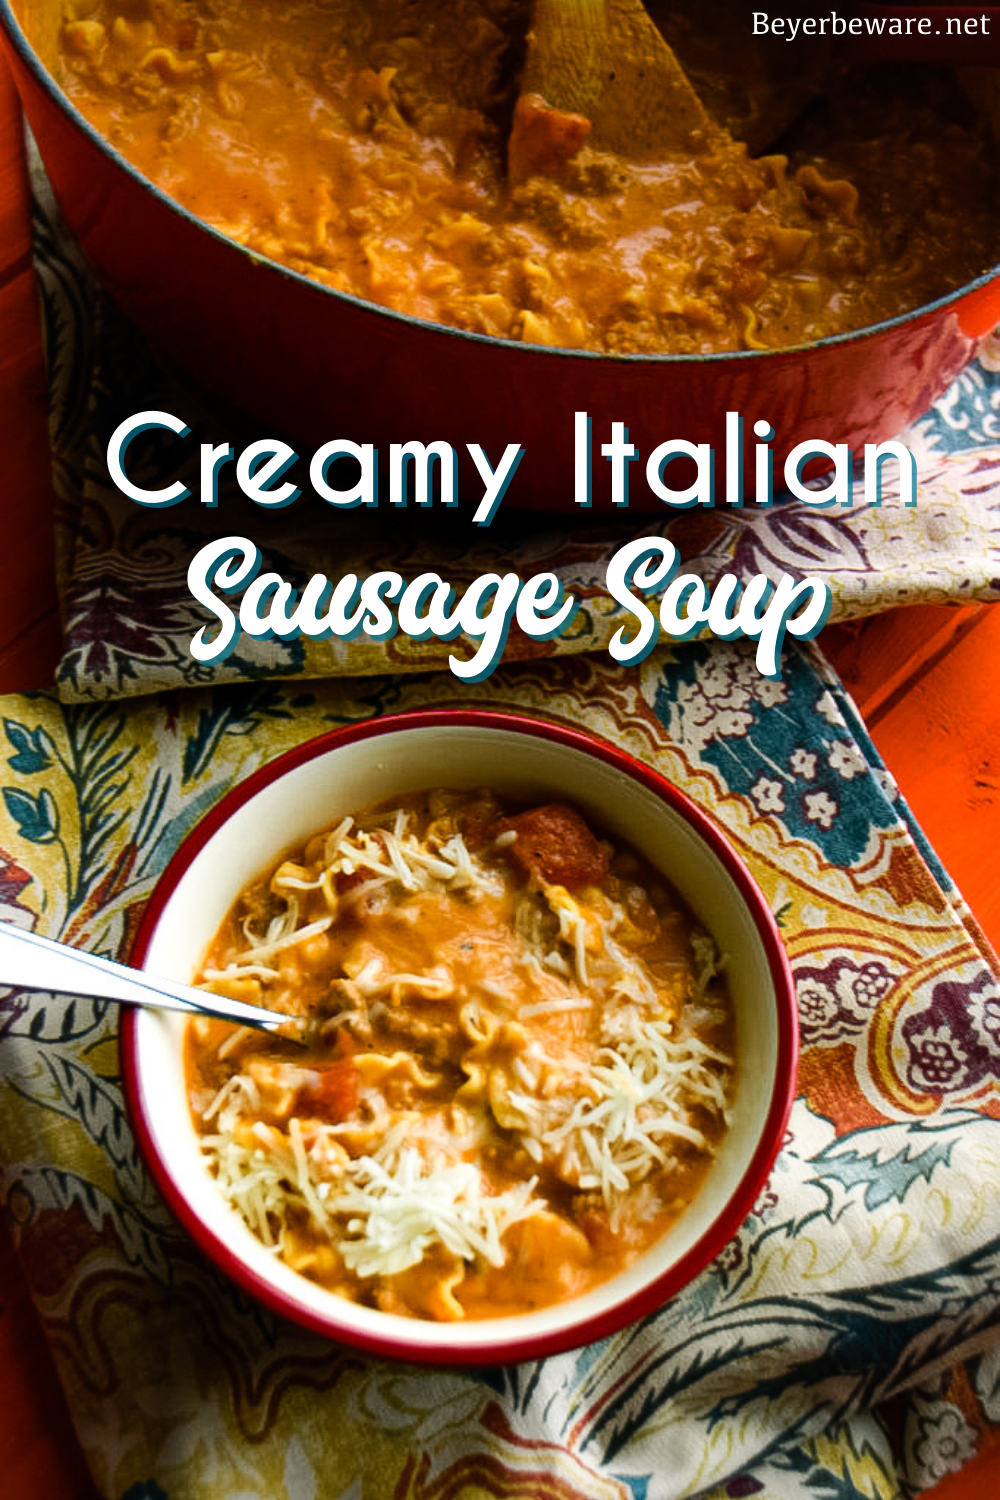 Creamy Italian Sausage Soup recipe is my new go-to tomato and sausage soup recipe that is rich and hearty, perfect for an easy dinner.